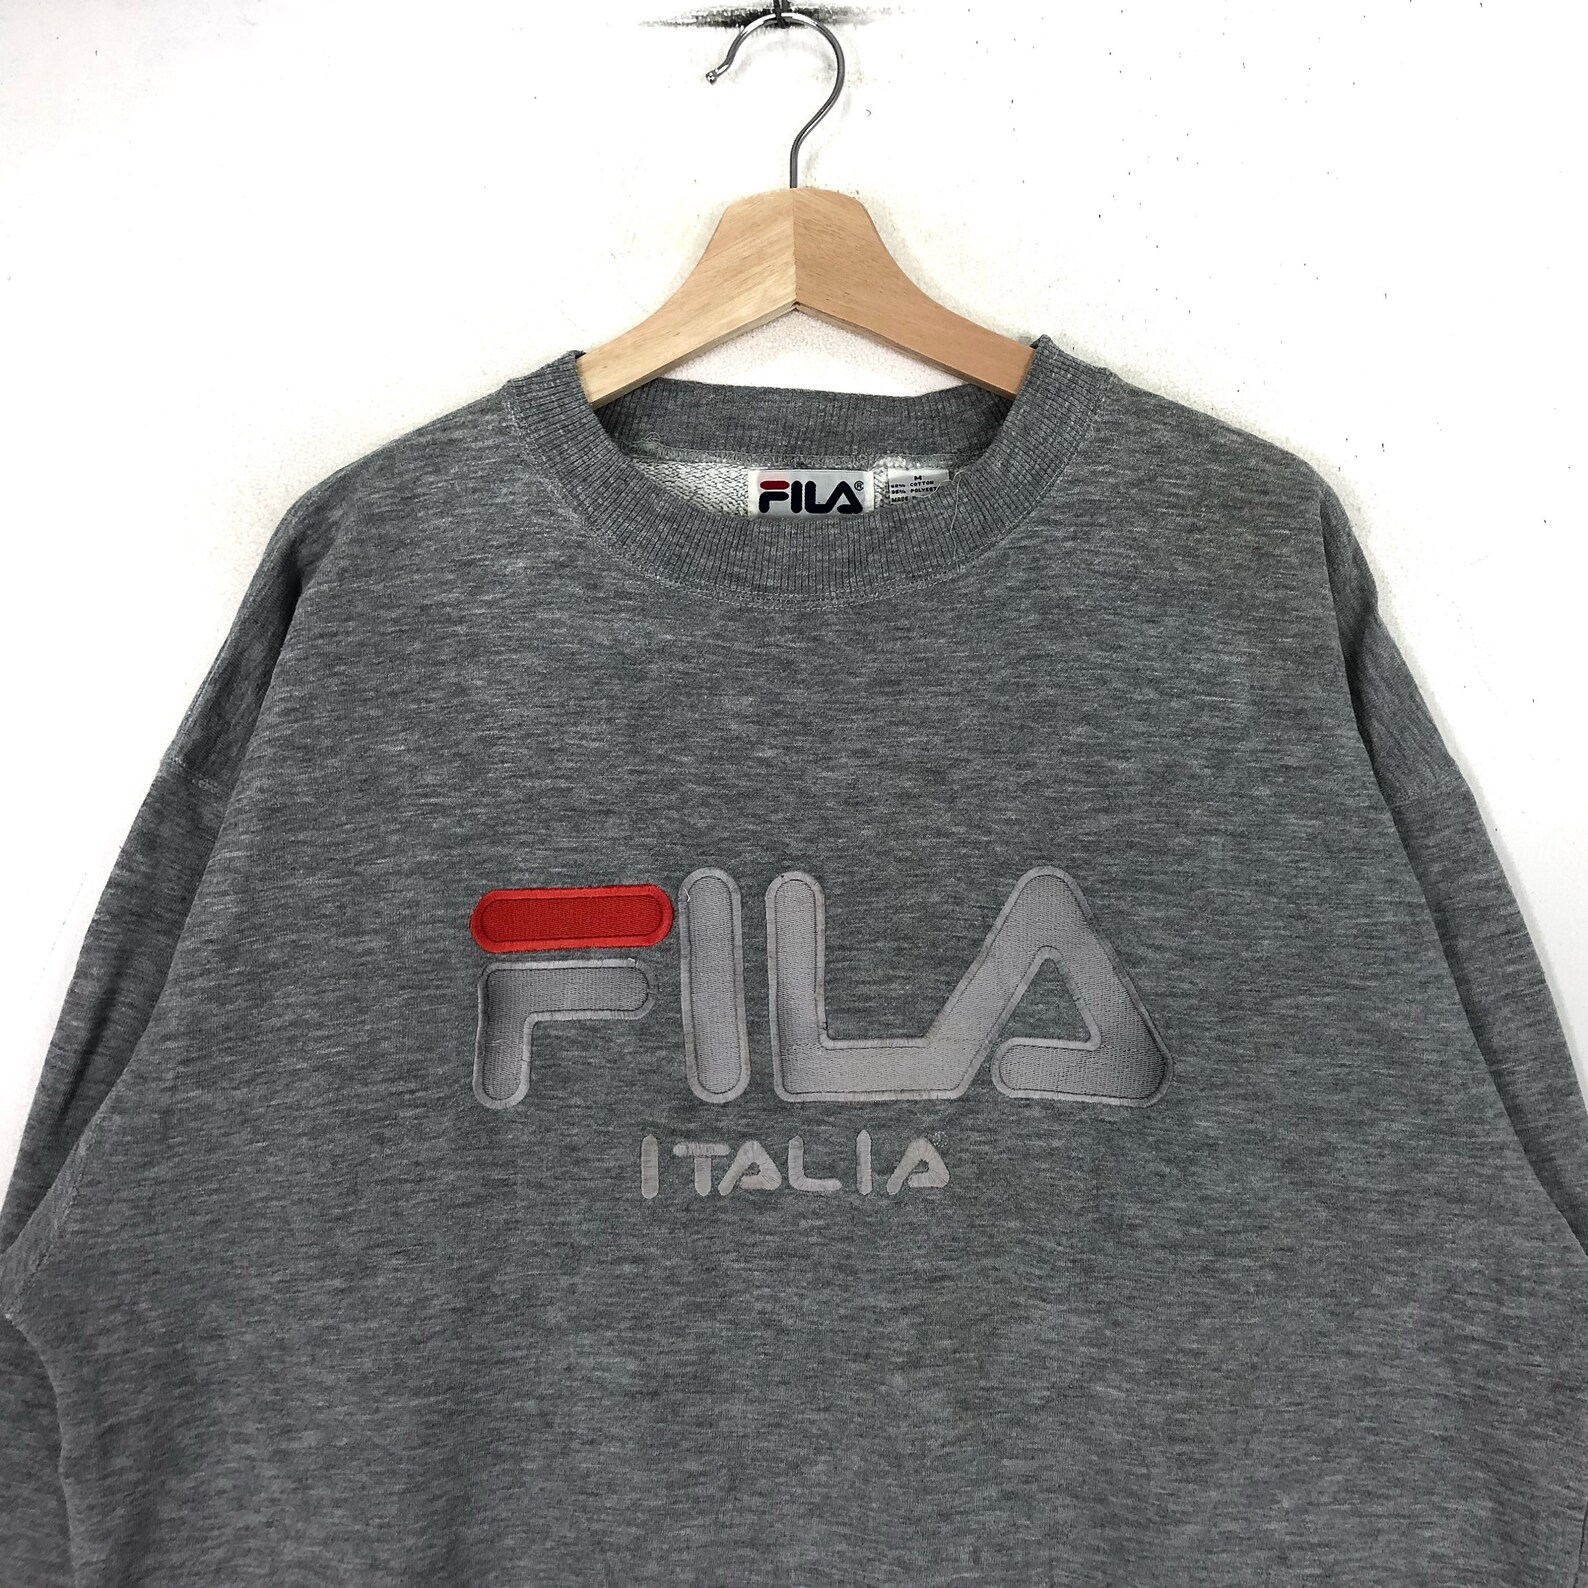 FILA SPORTWEAR Embroidery Spell Out Big Logo Gray Crew Neck | Etsy